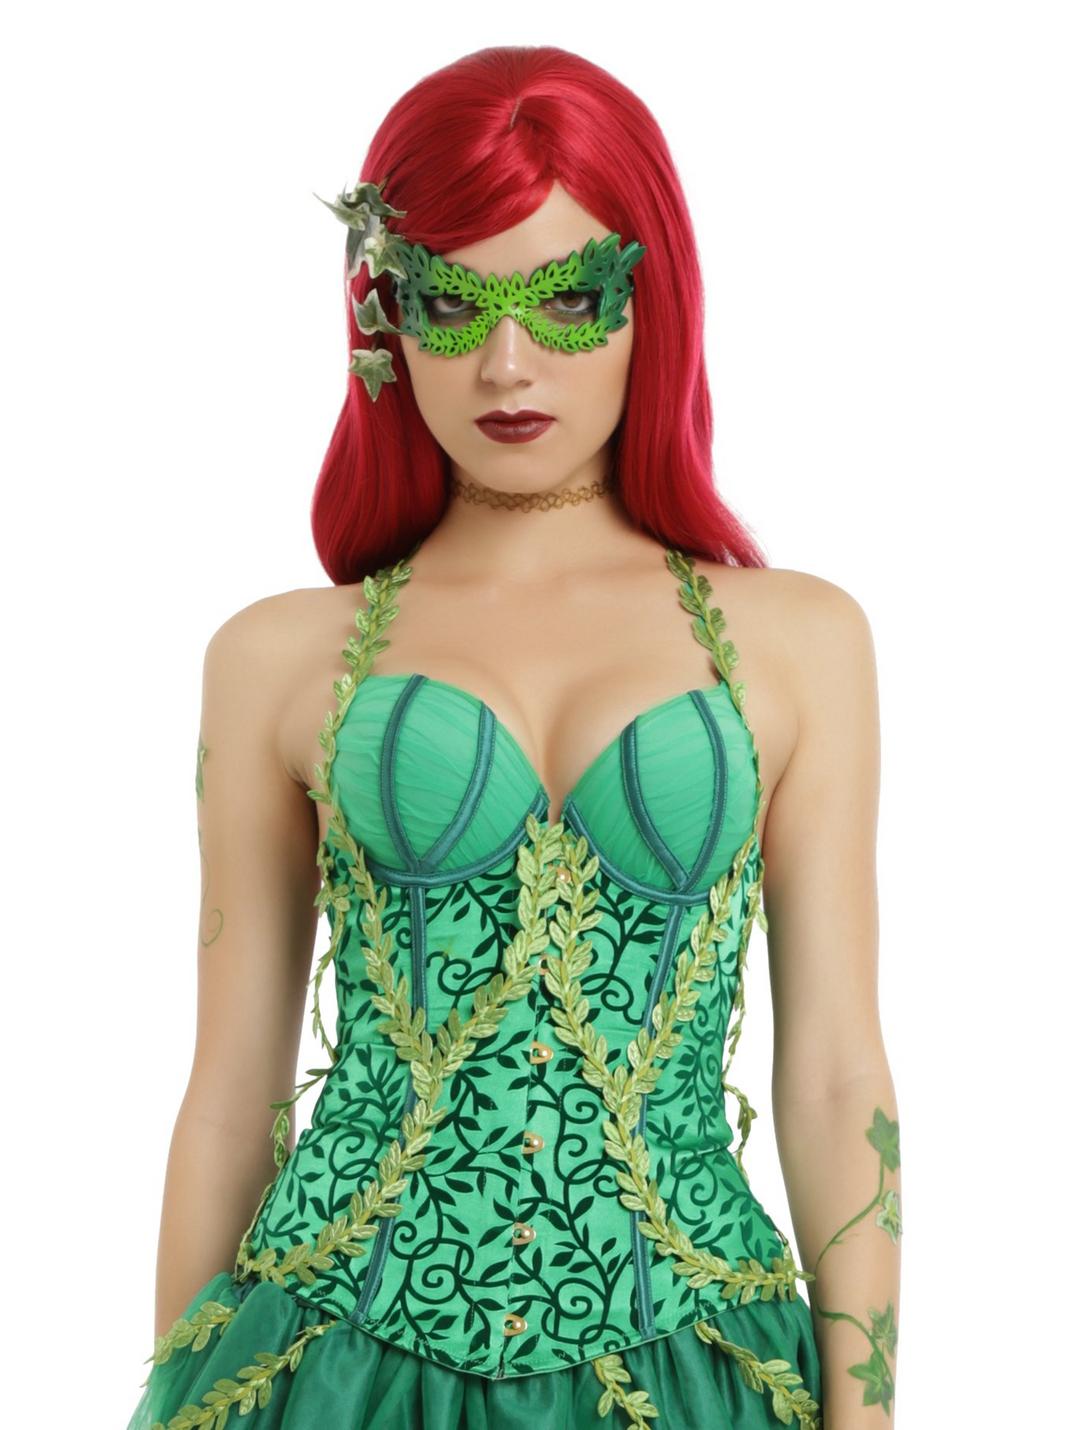 Best of Poison ivy hot pics